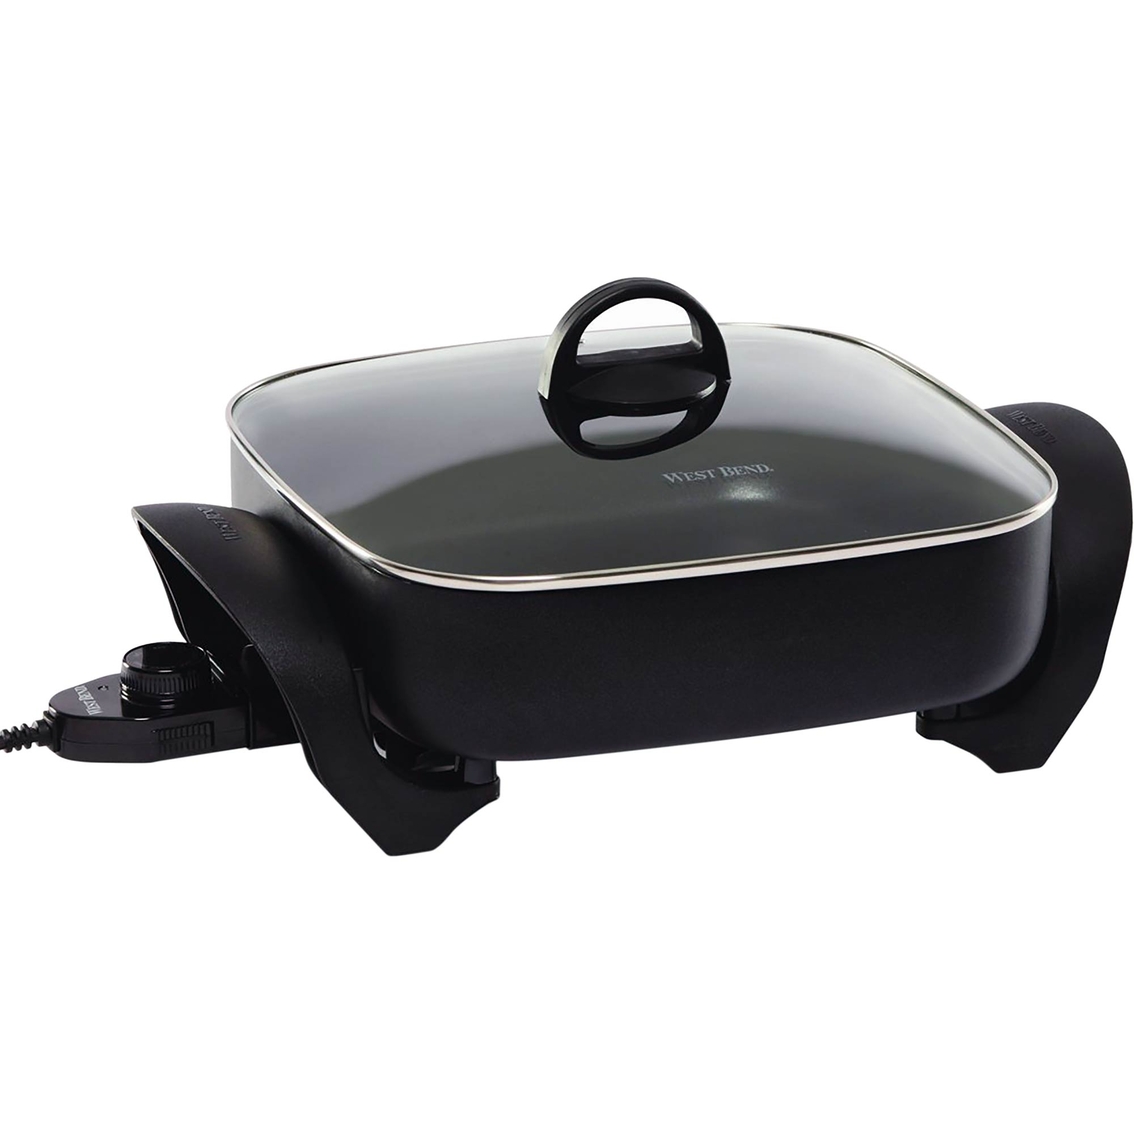 West Bend 12 In. Extra Deep Electric Skillet, Atg Archive